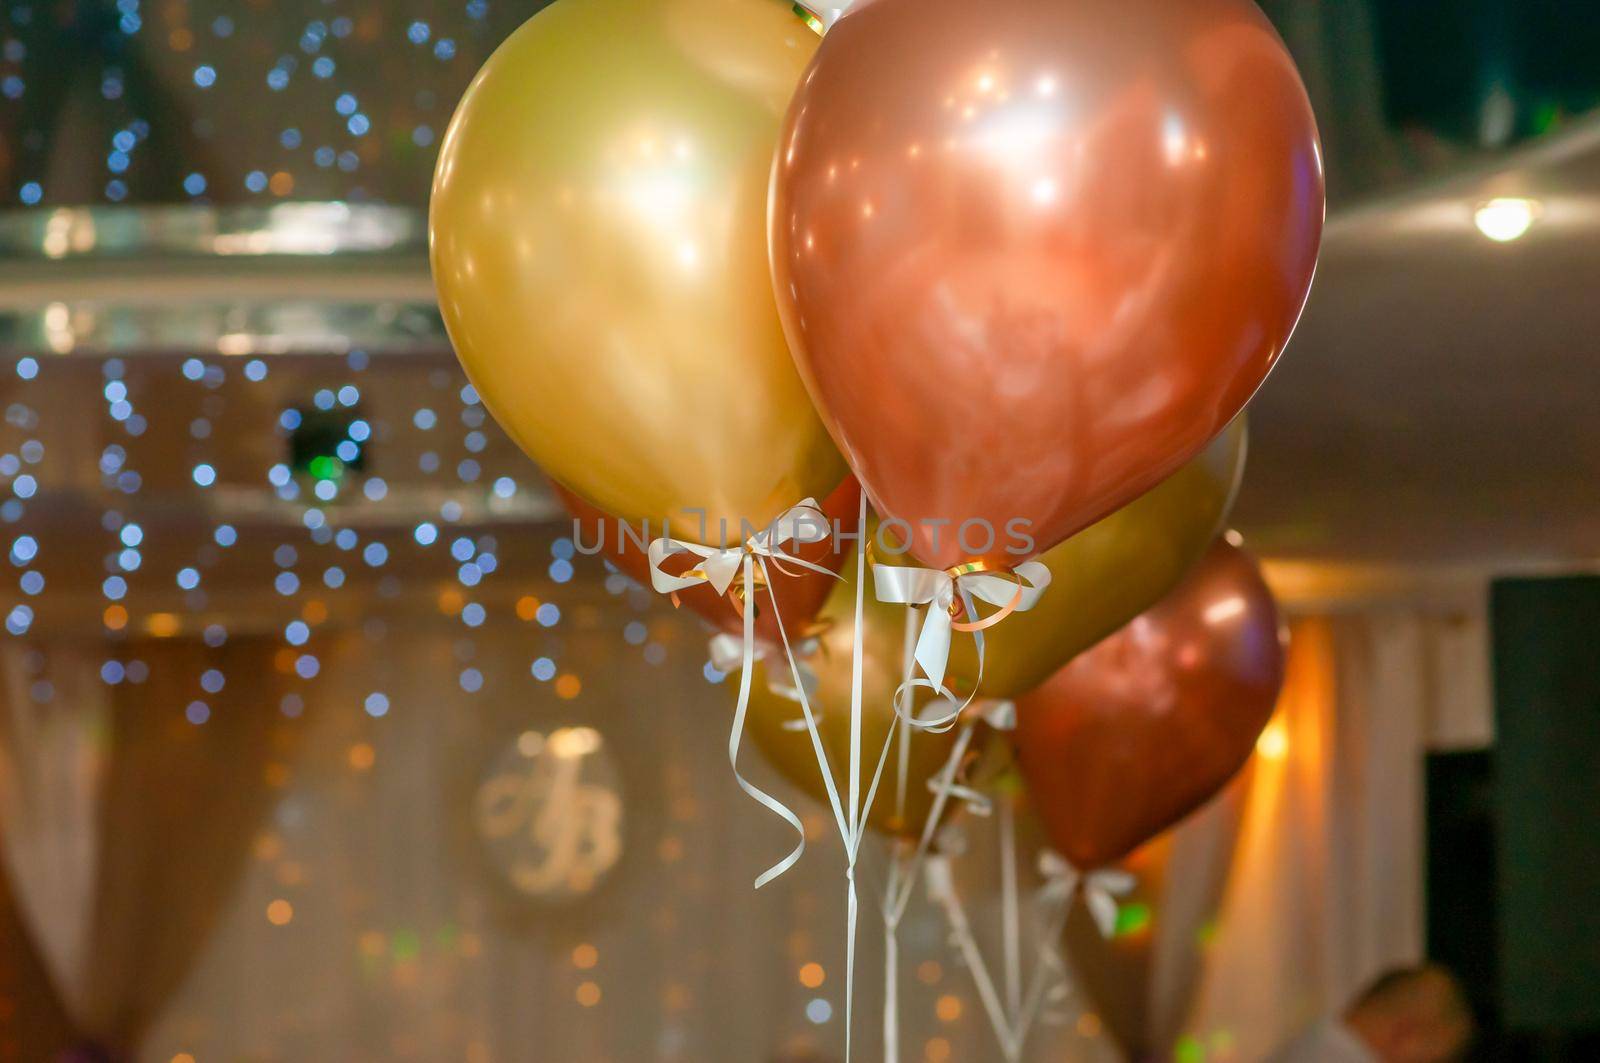 large balloons. close-up. balloons filled with helium hang in the air. High quality photo